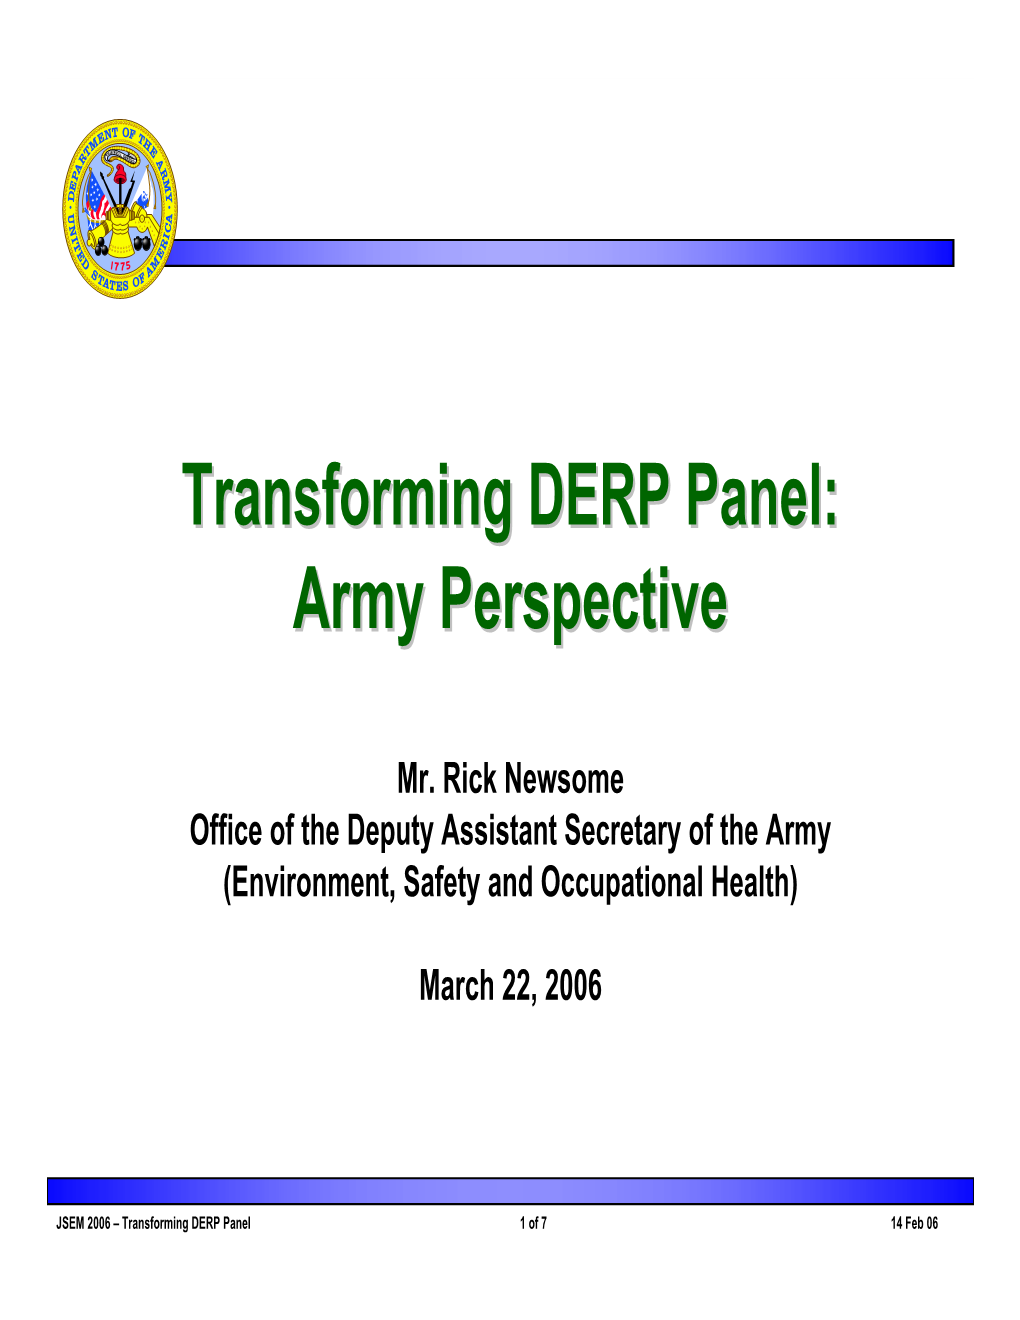 Transforming DERP Panel: Army Perspective